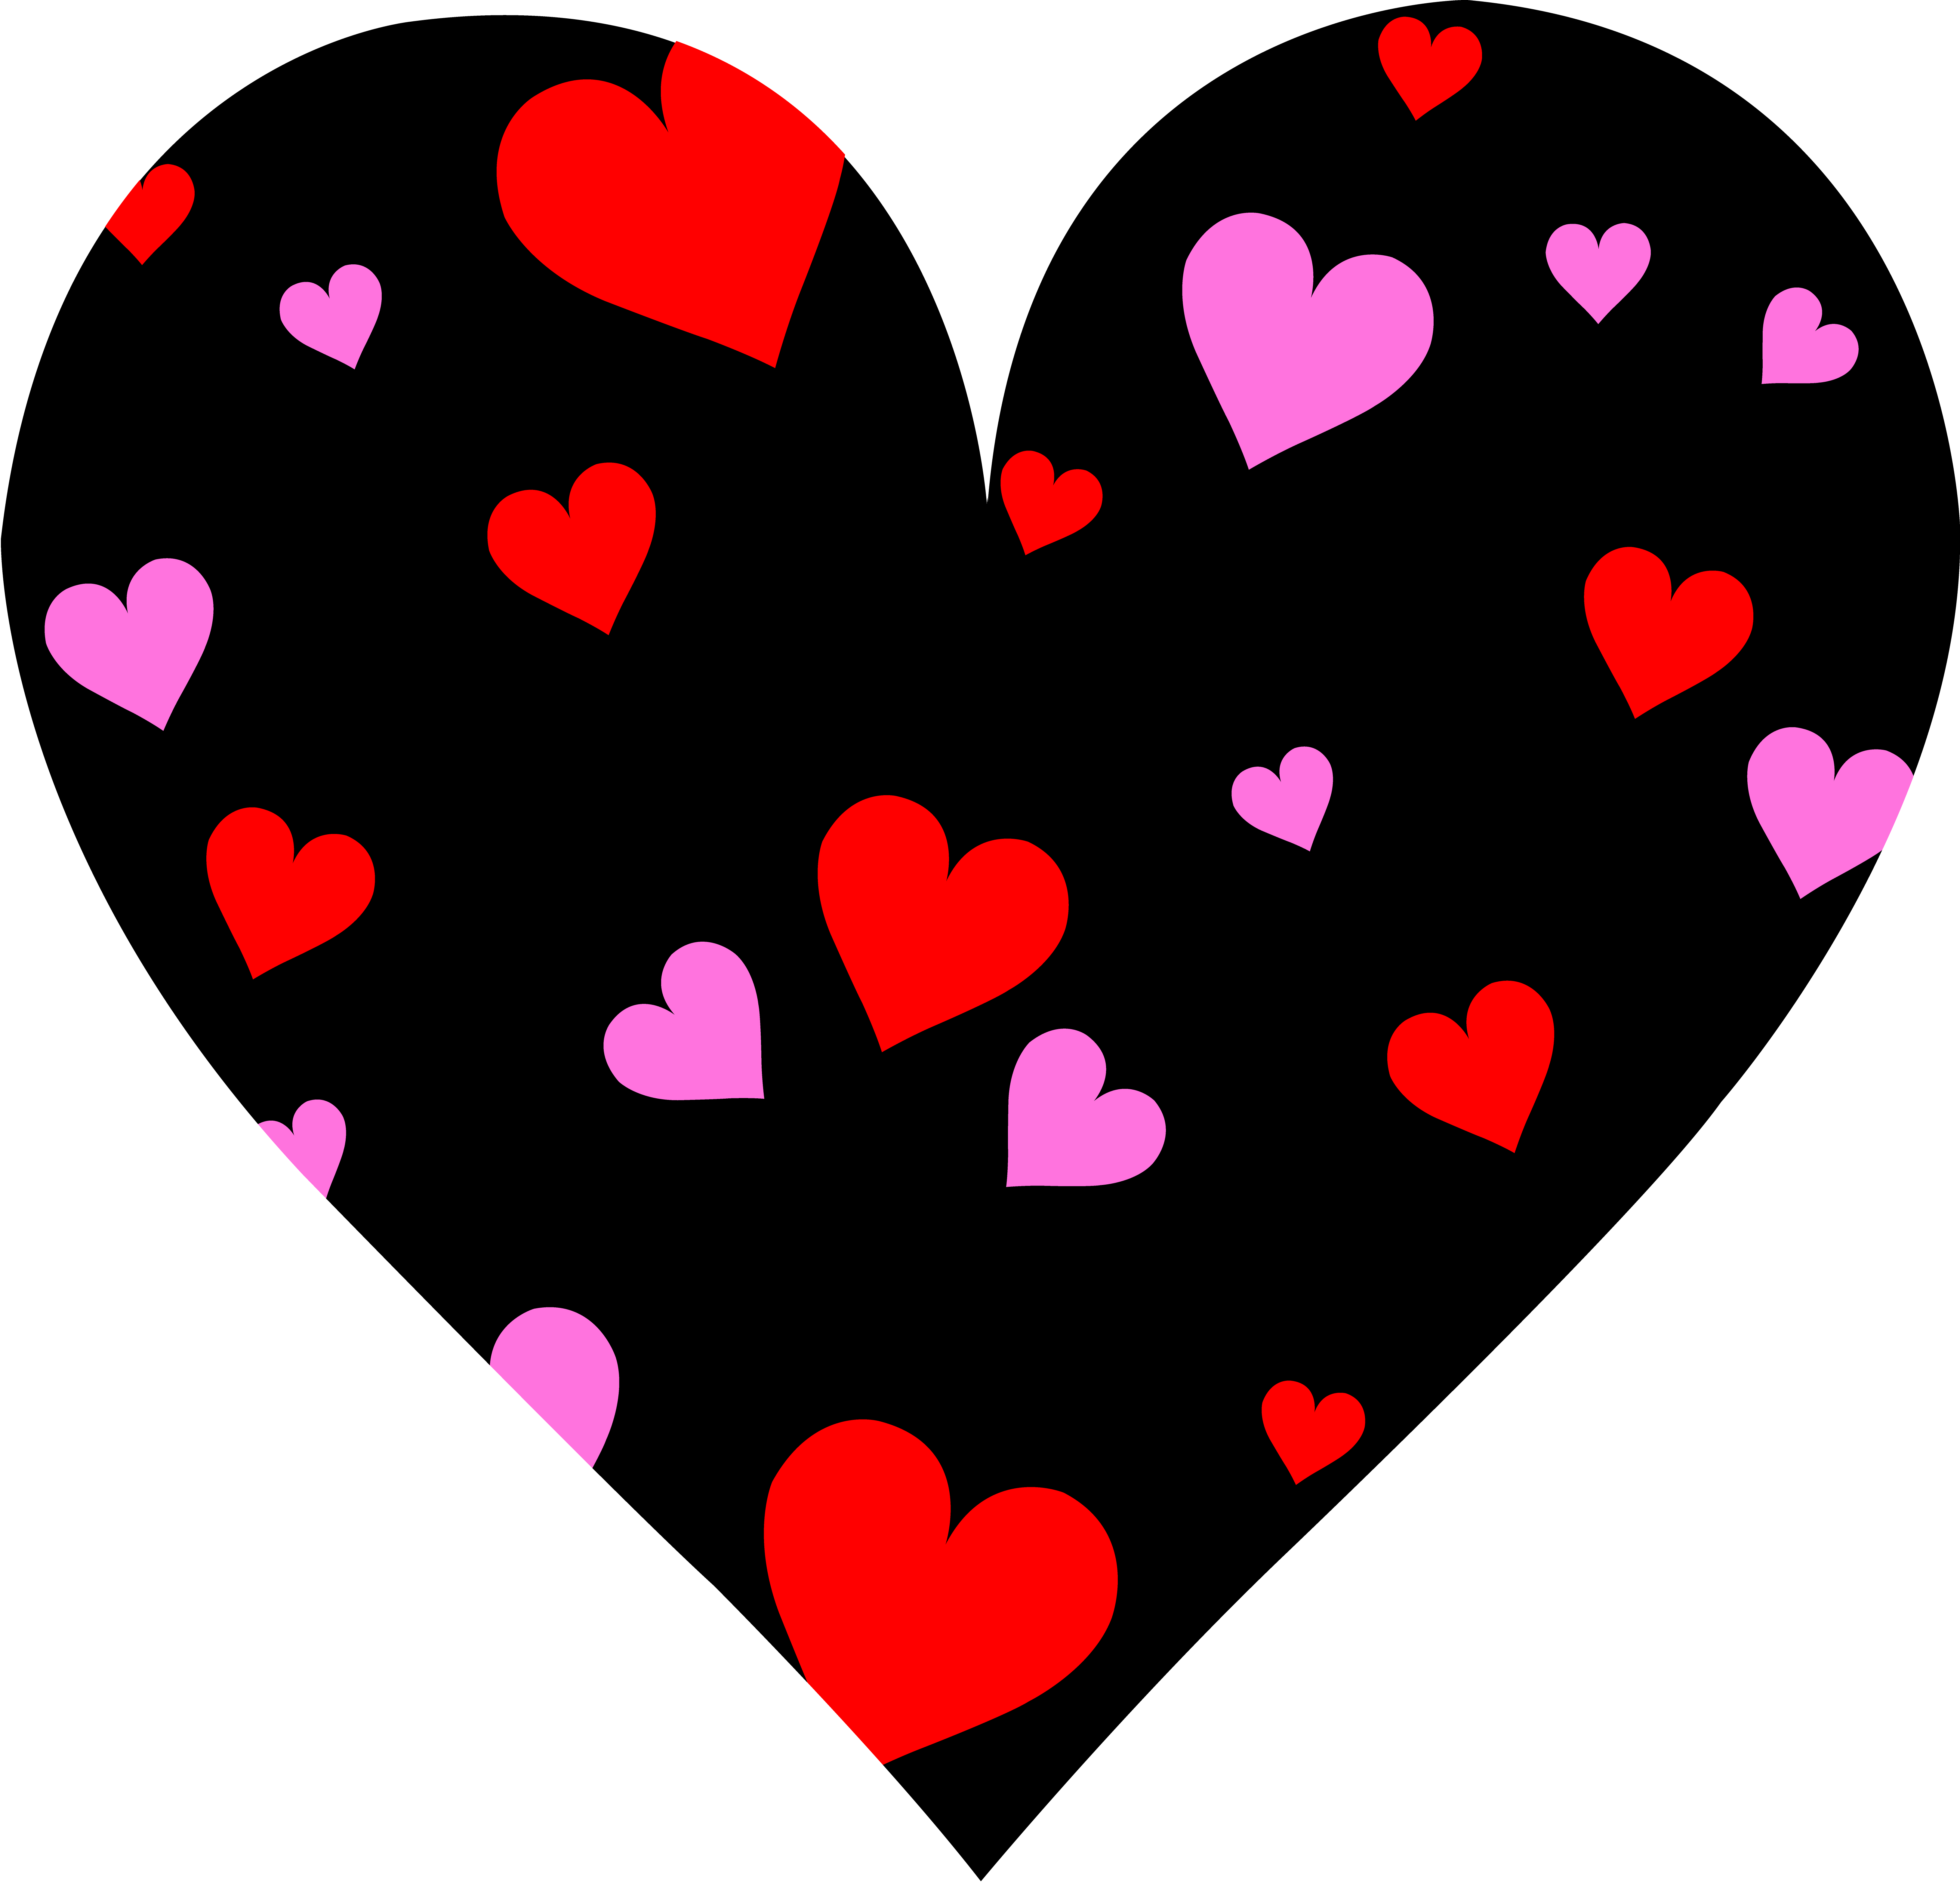 Valentine at getdrawings com. Hearts clipart line